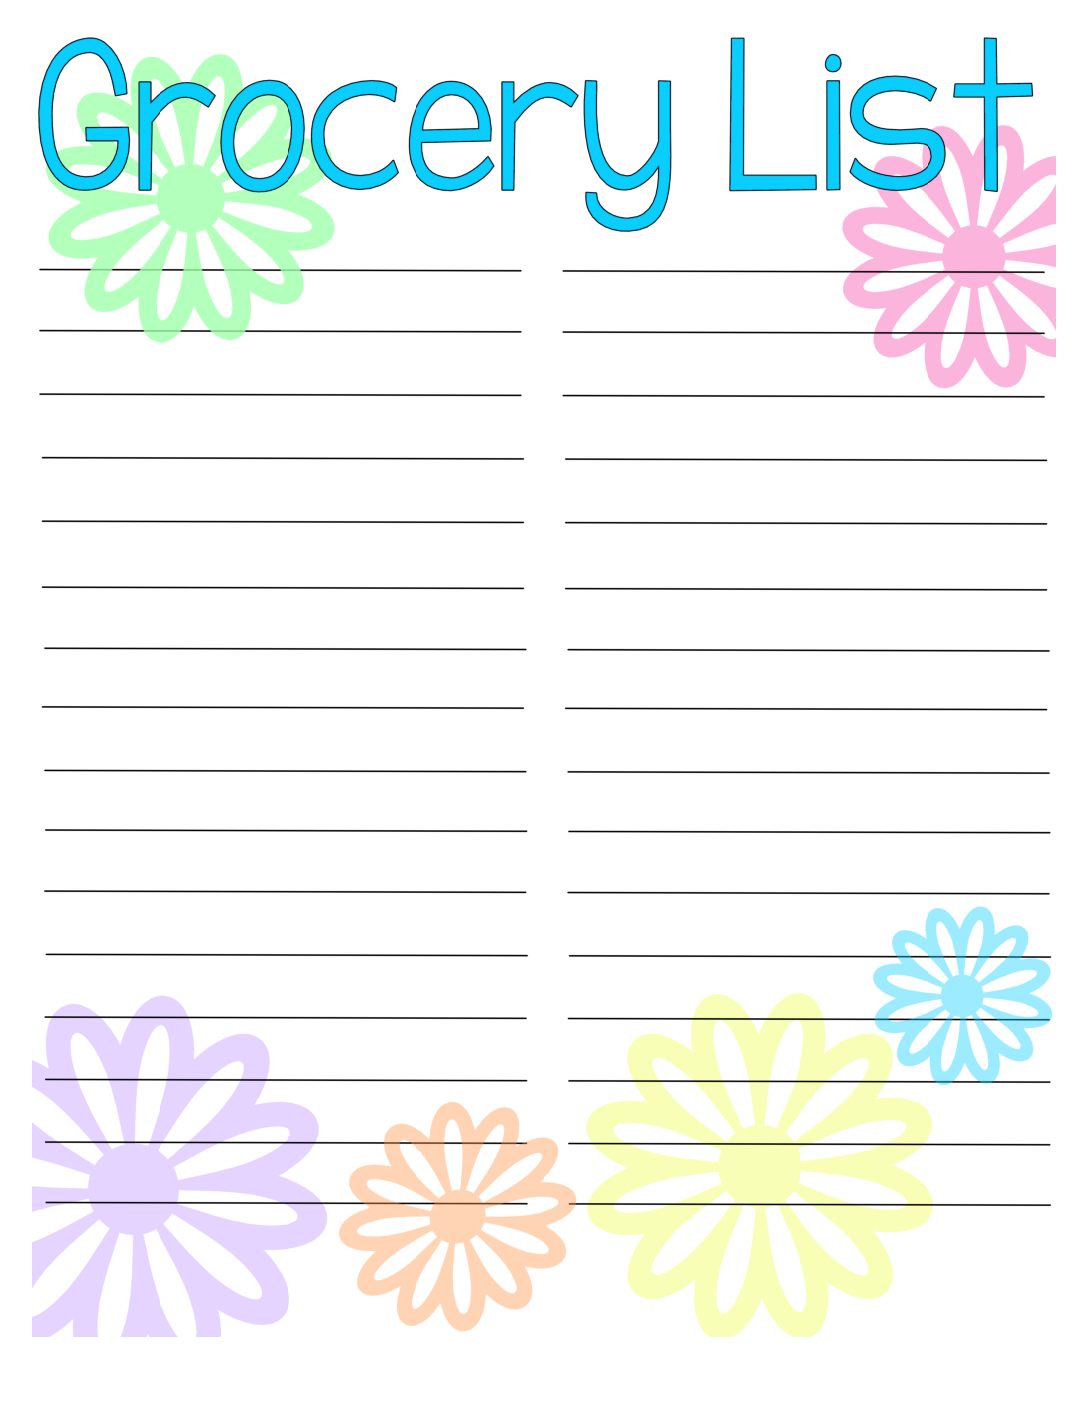 grocery-list-free-printable-typically-simple